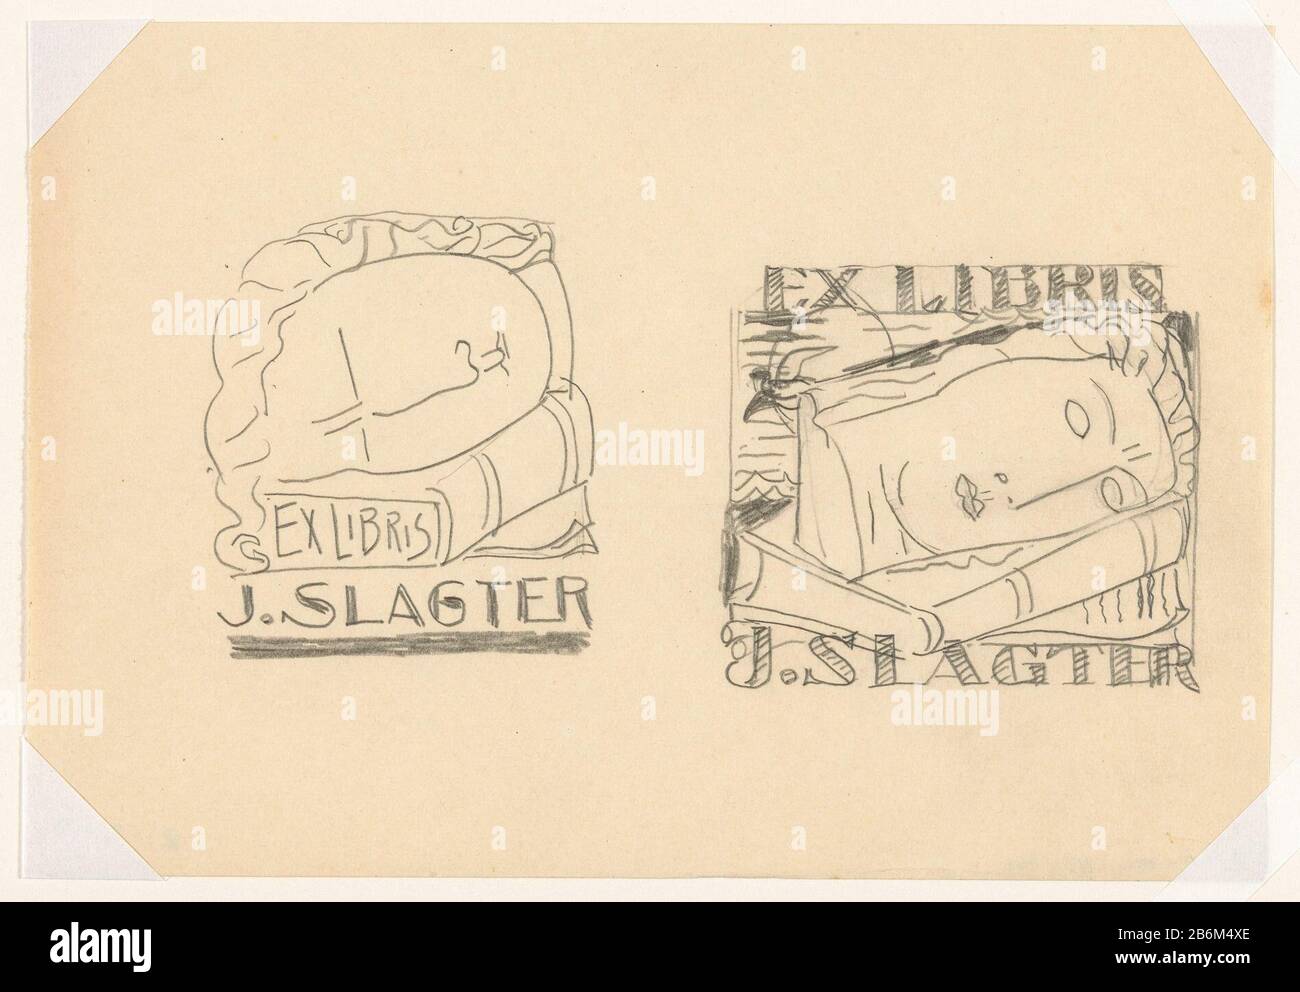 Ex libris voor J Slagter (ontwerp, twee keer) (titel op object) Two designs for a Ex Libris on a single sheet. The show is a stone head of a woman resting on a boek. Manufacturer : artist Leo Gestel Dating: ca. 1935 - ca. 1940 Physical features: Pencil on paper material: pencil paper Dimensions: sheet: H 135 mm × W 197 mmbeeld: H 160 mm × W 70 mmOnderwerpWie J. Slagter Stock Photo